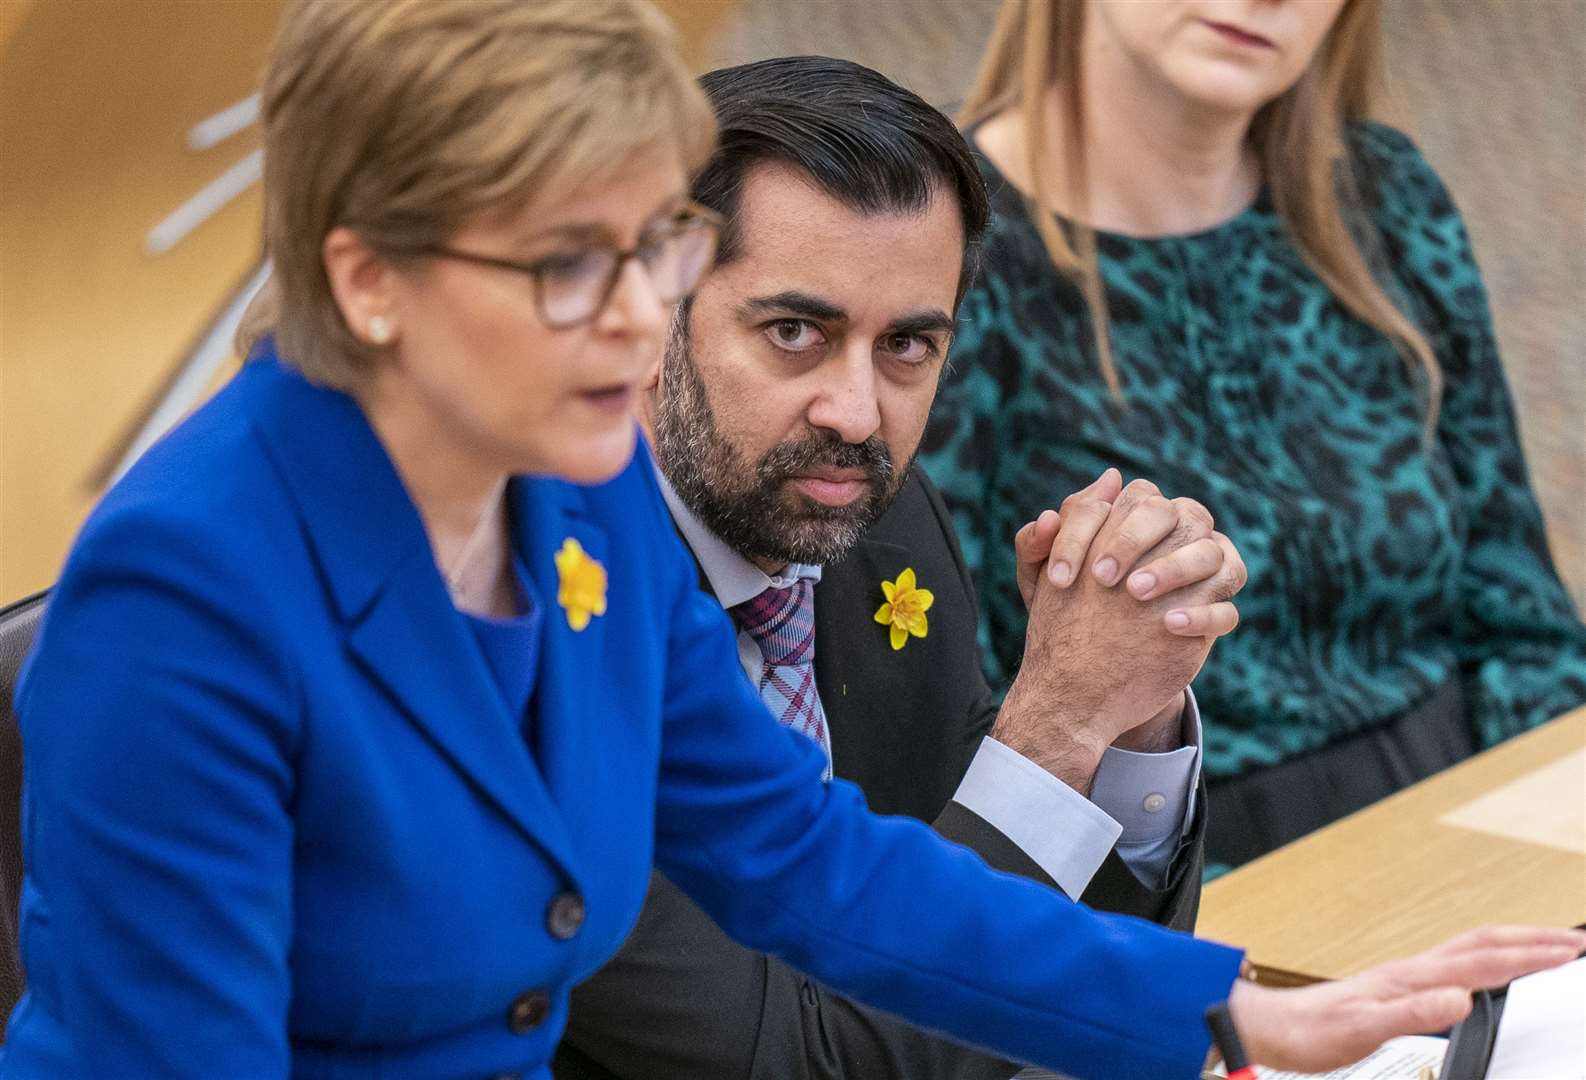 Humza Yousaf has rejected calls to suspend Nicola Sturgeon from the SNP in light of her arrest (PA)